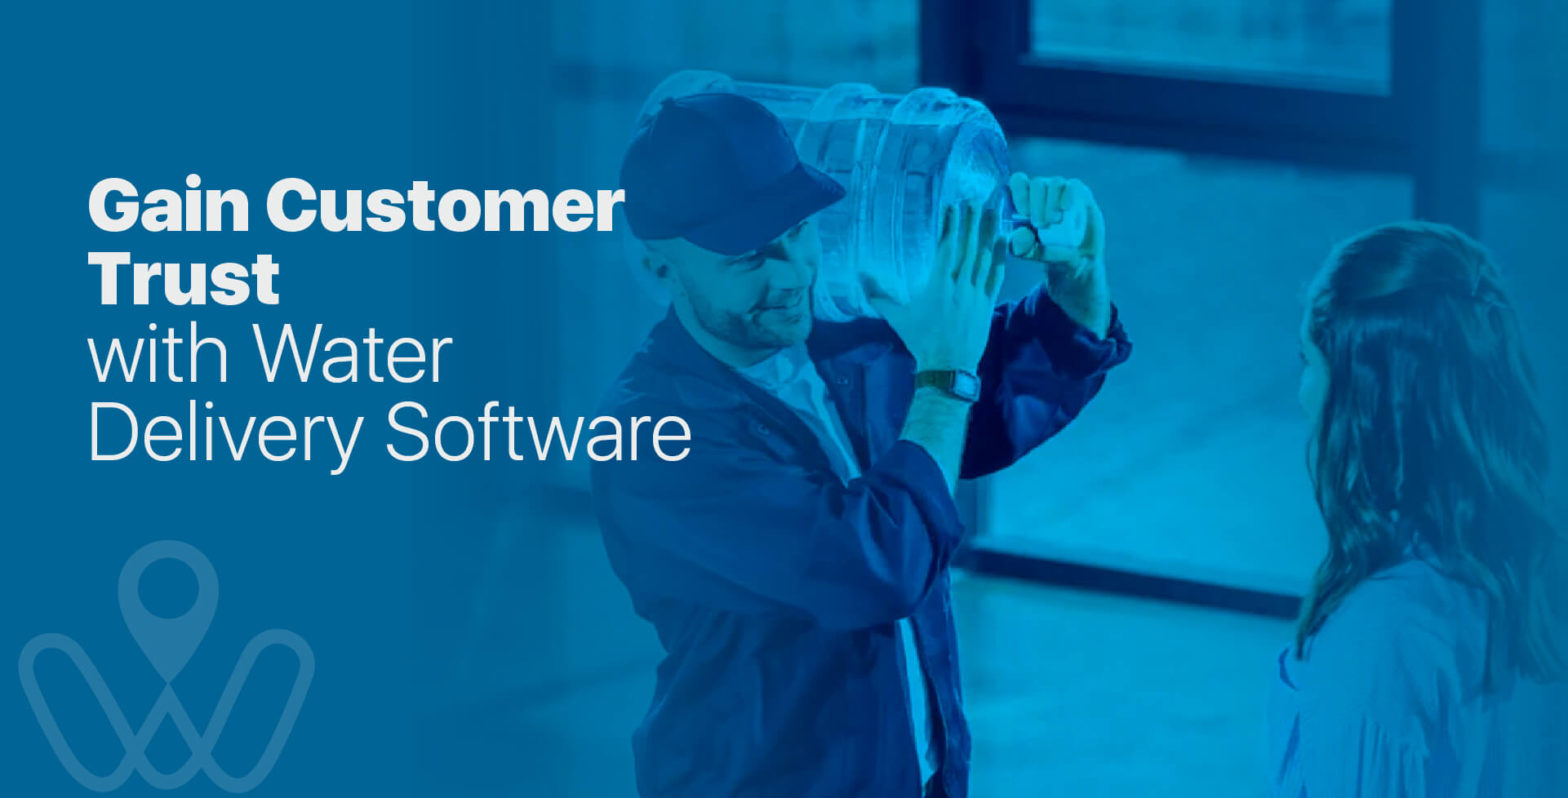 Gain customers trust with water delivery software solutions